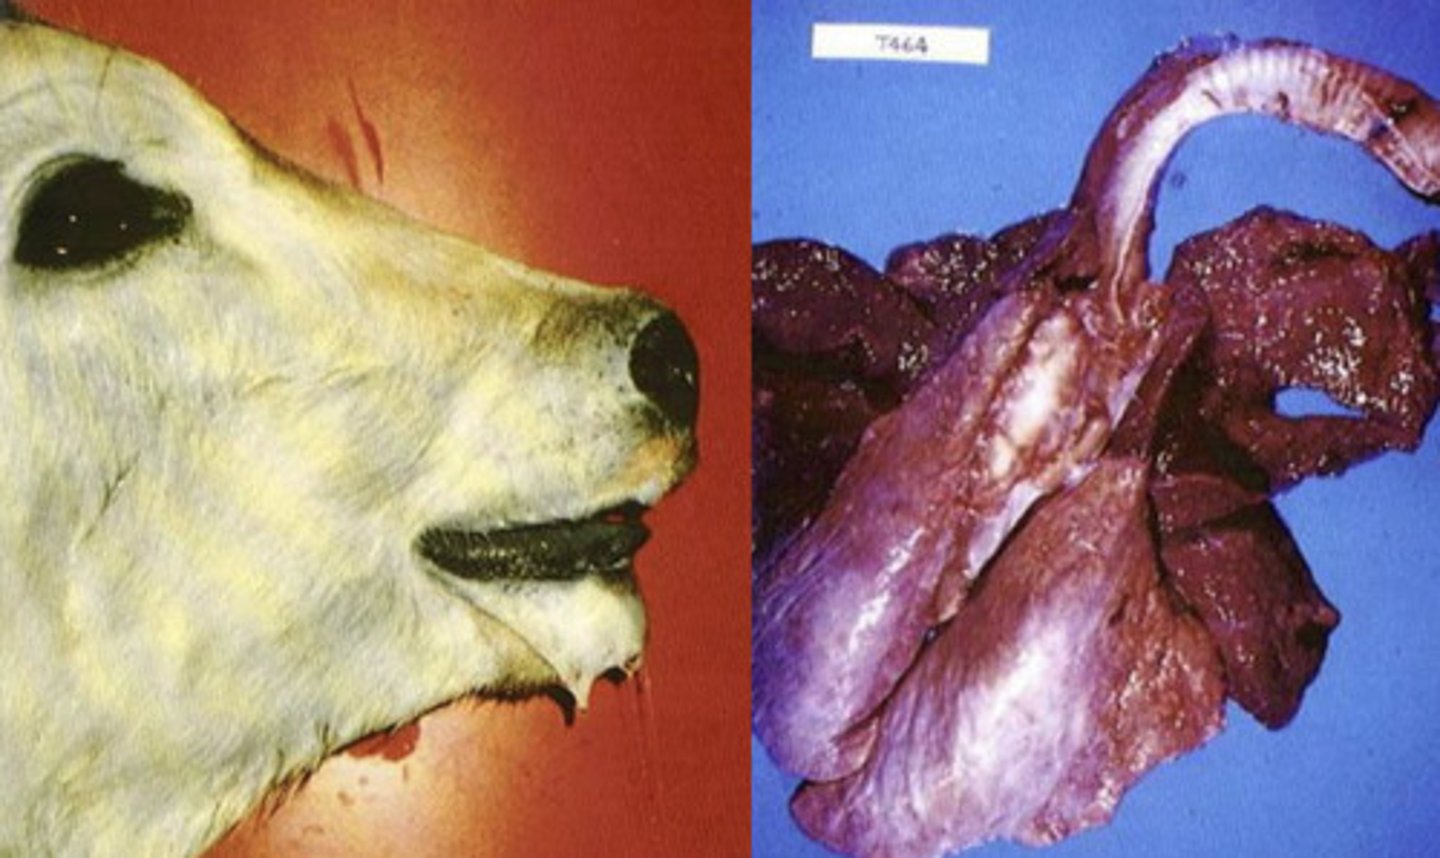 <p>-this disease is part of the Bovine Respiratory Disease Complex and is noted for the pustular characteristic of lesions<br>-excessive salivation and pneumonia are also associated with this respiratory virus<br>-pneumonia is typically cause of death<br><br>a) Malignant Catarrhal Fever<br>b) Infectious Bovine Rhinotracheitis (IBR)<br>c) Dermopathic Bovine Herpesvirus Infection (Pseduo-Lumpy Skin)<br>d) Pseudorabies (Mad Itch/Aujezsky's disease)</p>